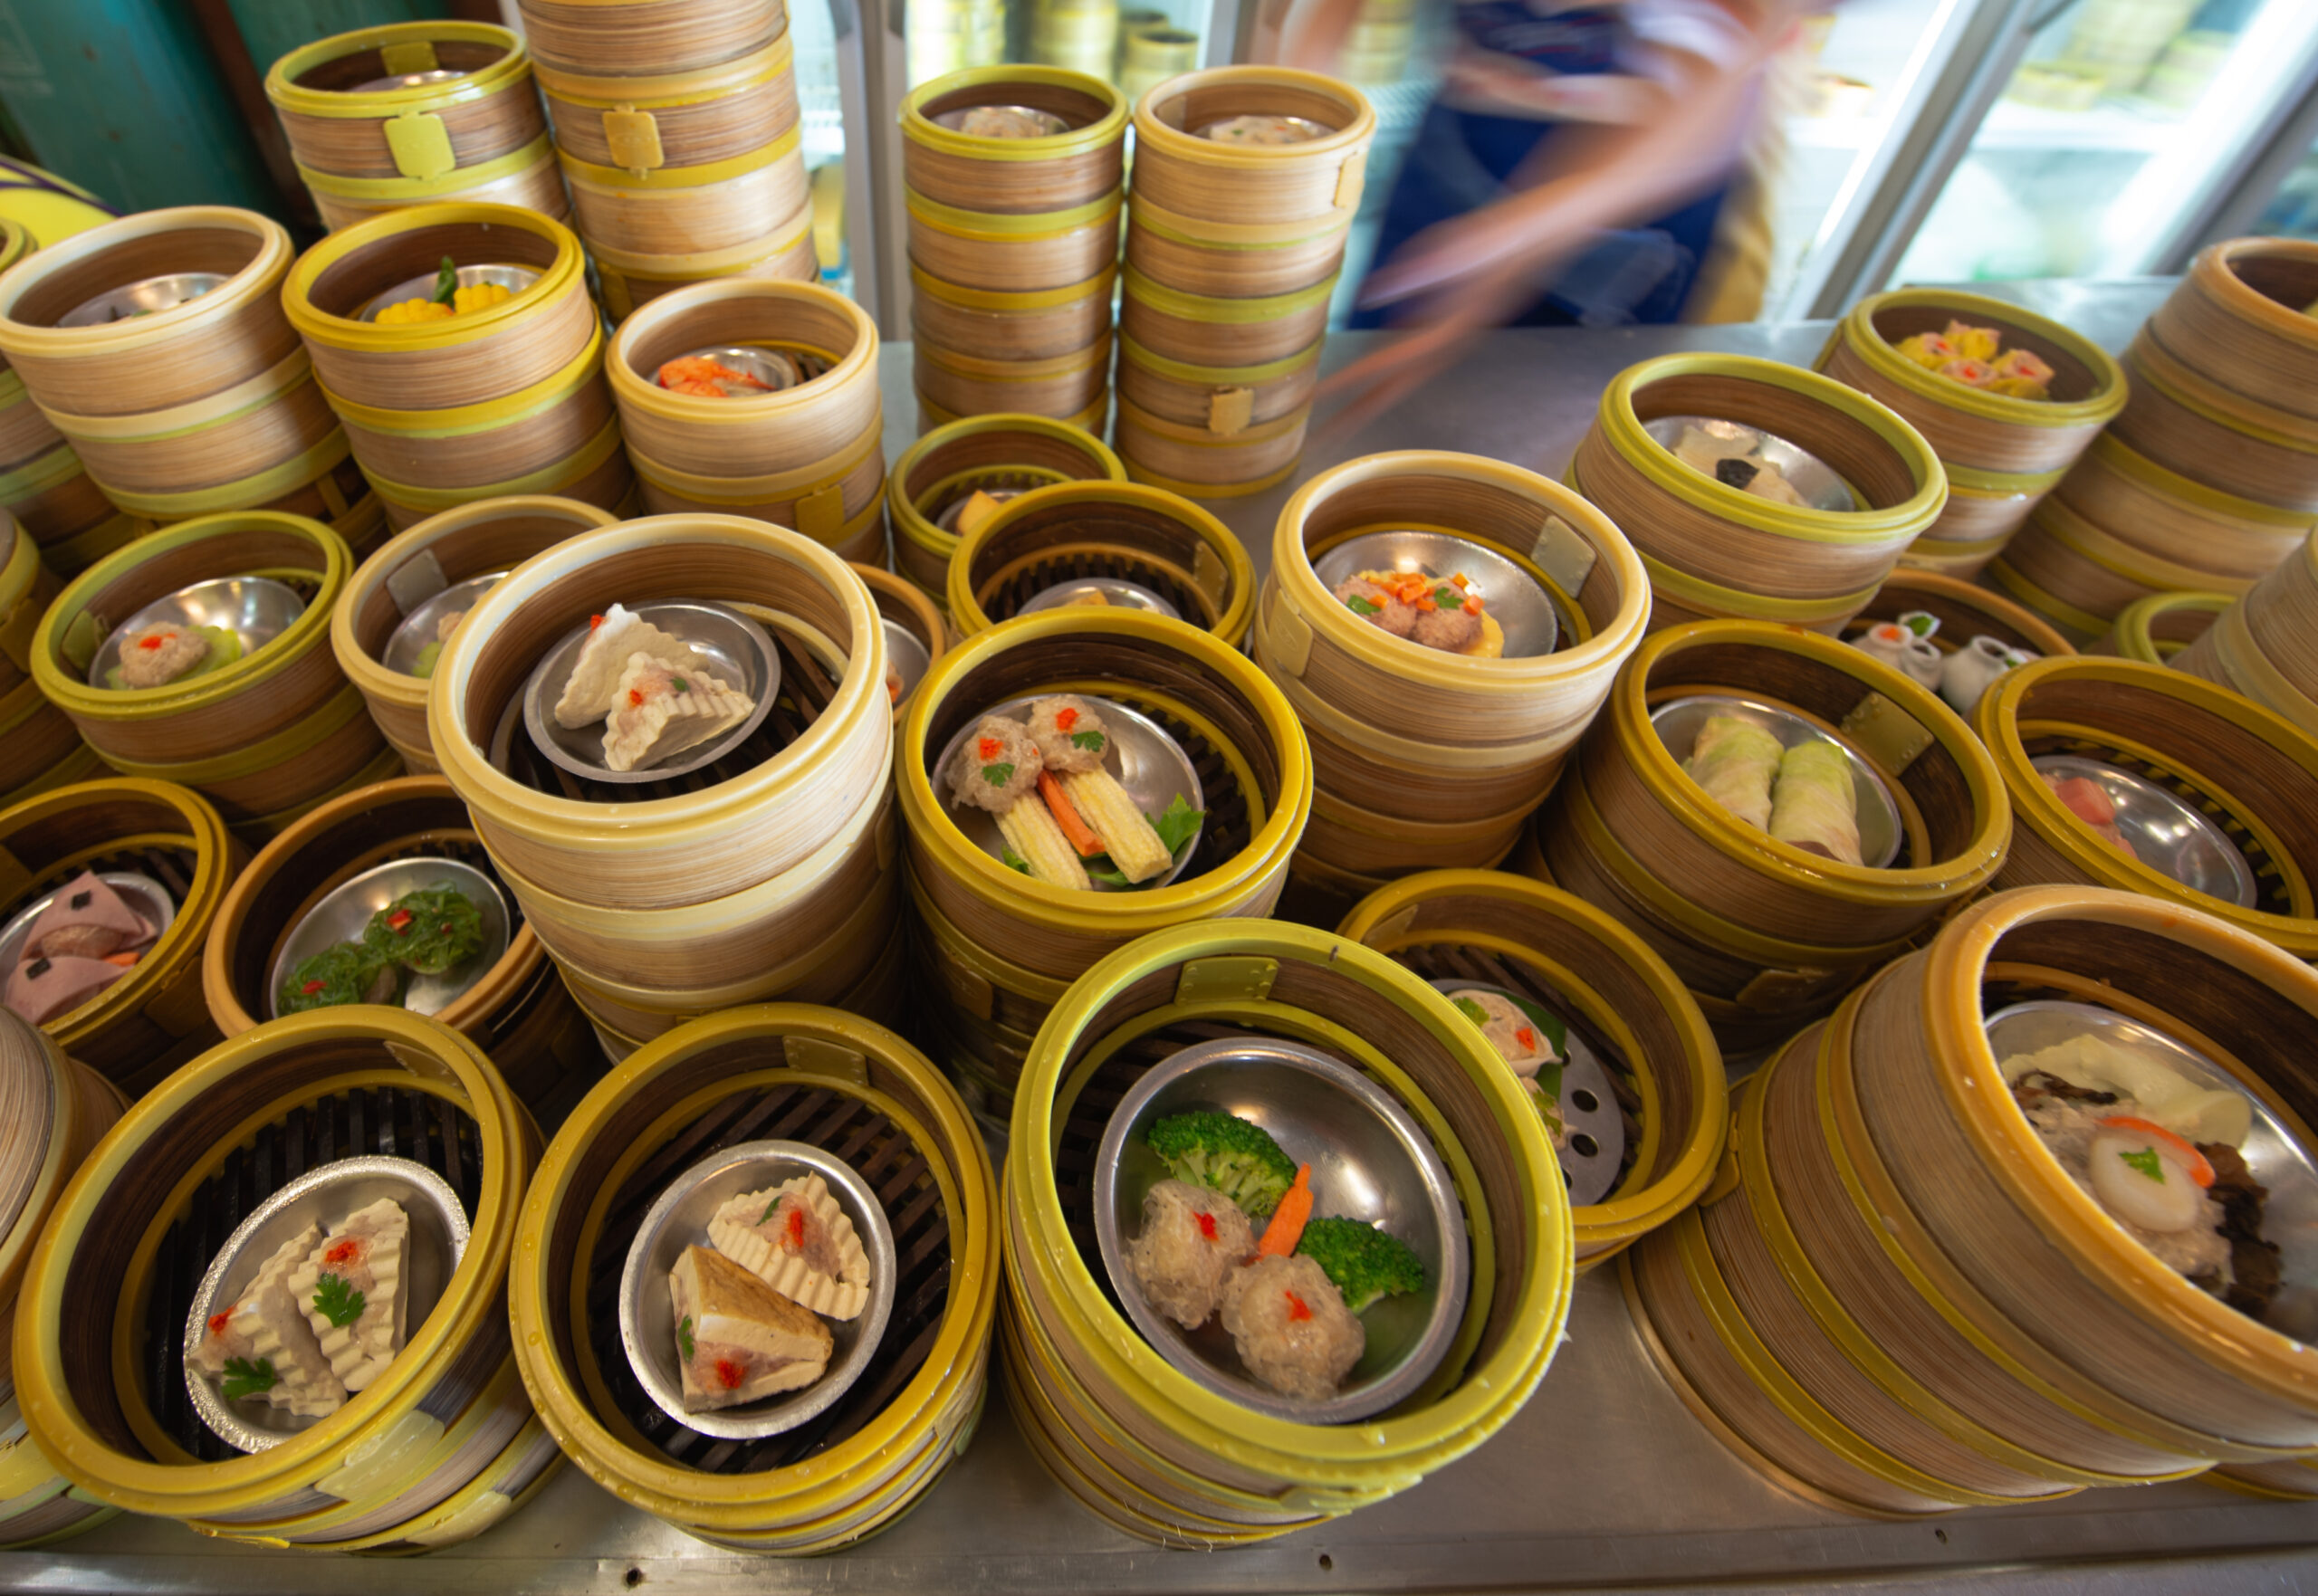 Keeping Up with Food Hygiene Standards: Challenges Faced by Singapore Food Businesses